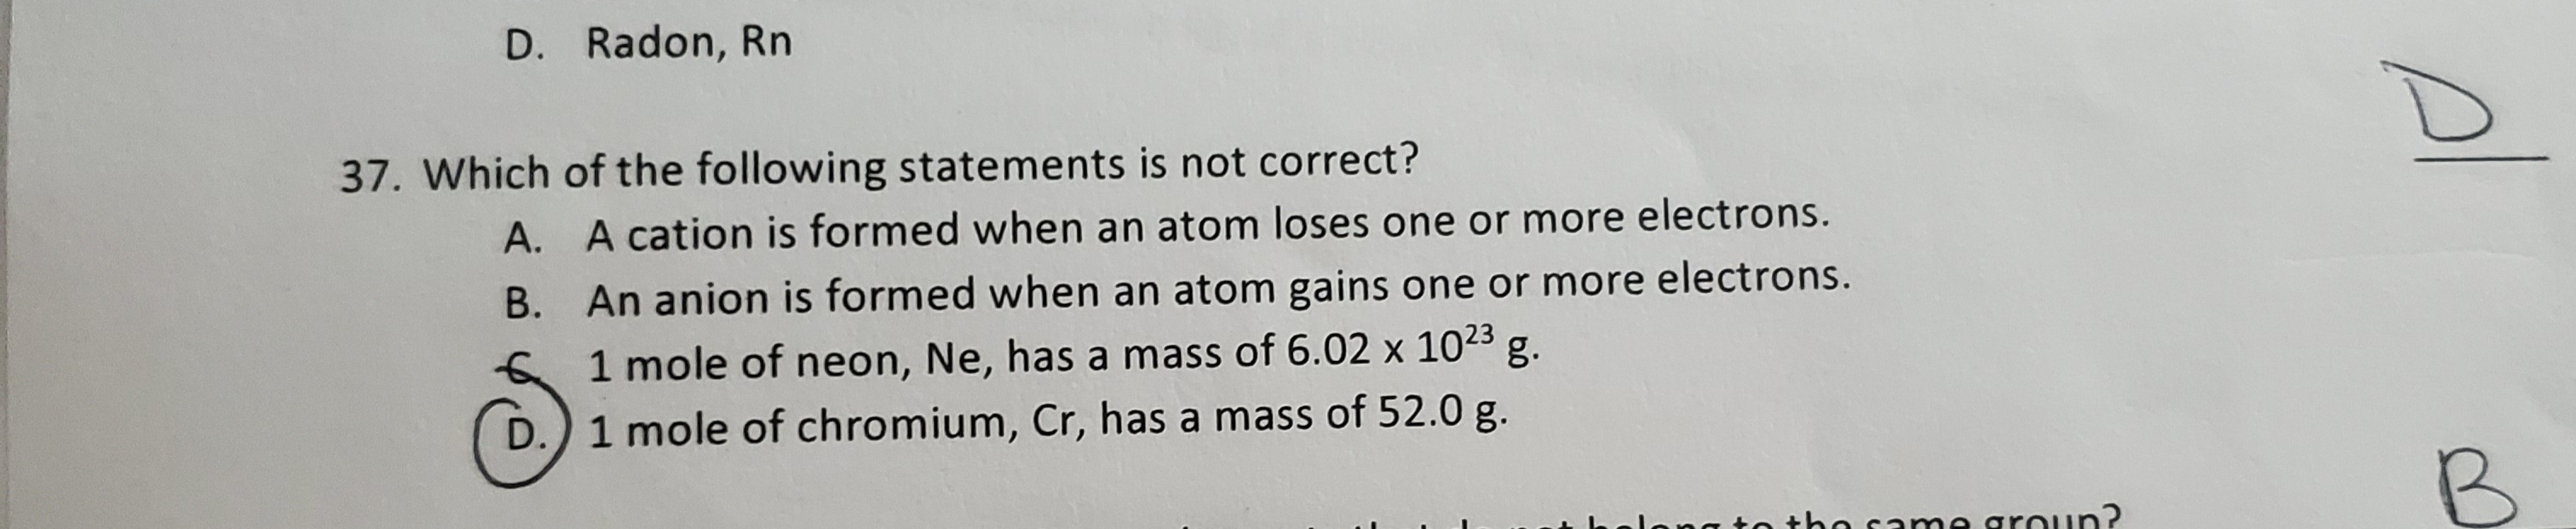 37. Which of the following statements is not correct?
A. A cation is formed when an atom loses one or more electrons.
B. An anion is formed when an atom gains one or more electrons.
1 mole of neon, Ne, has a mass of 6.02 x 1023 g.
1 mole of chromium, Cr, has a mass of 52.0 g.
